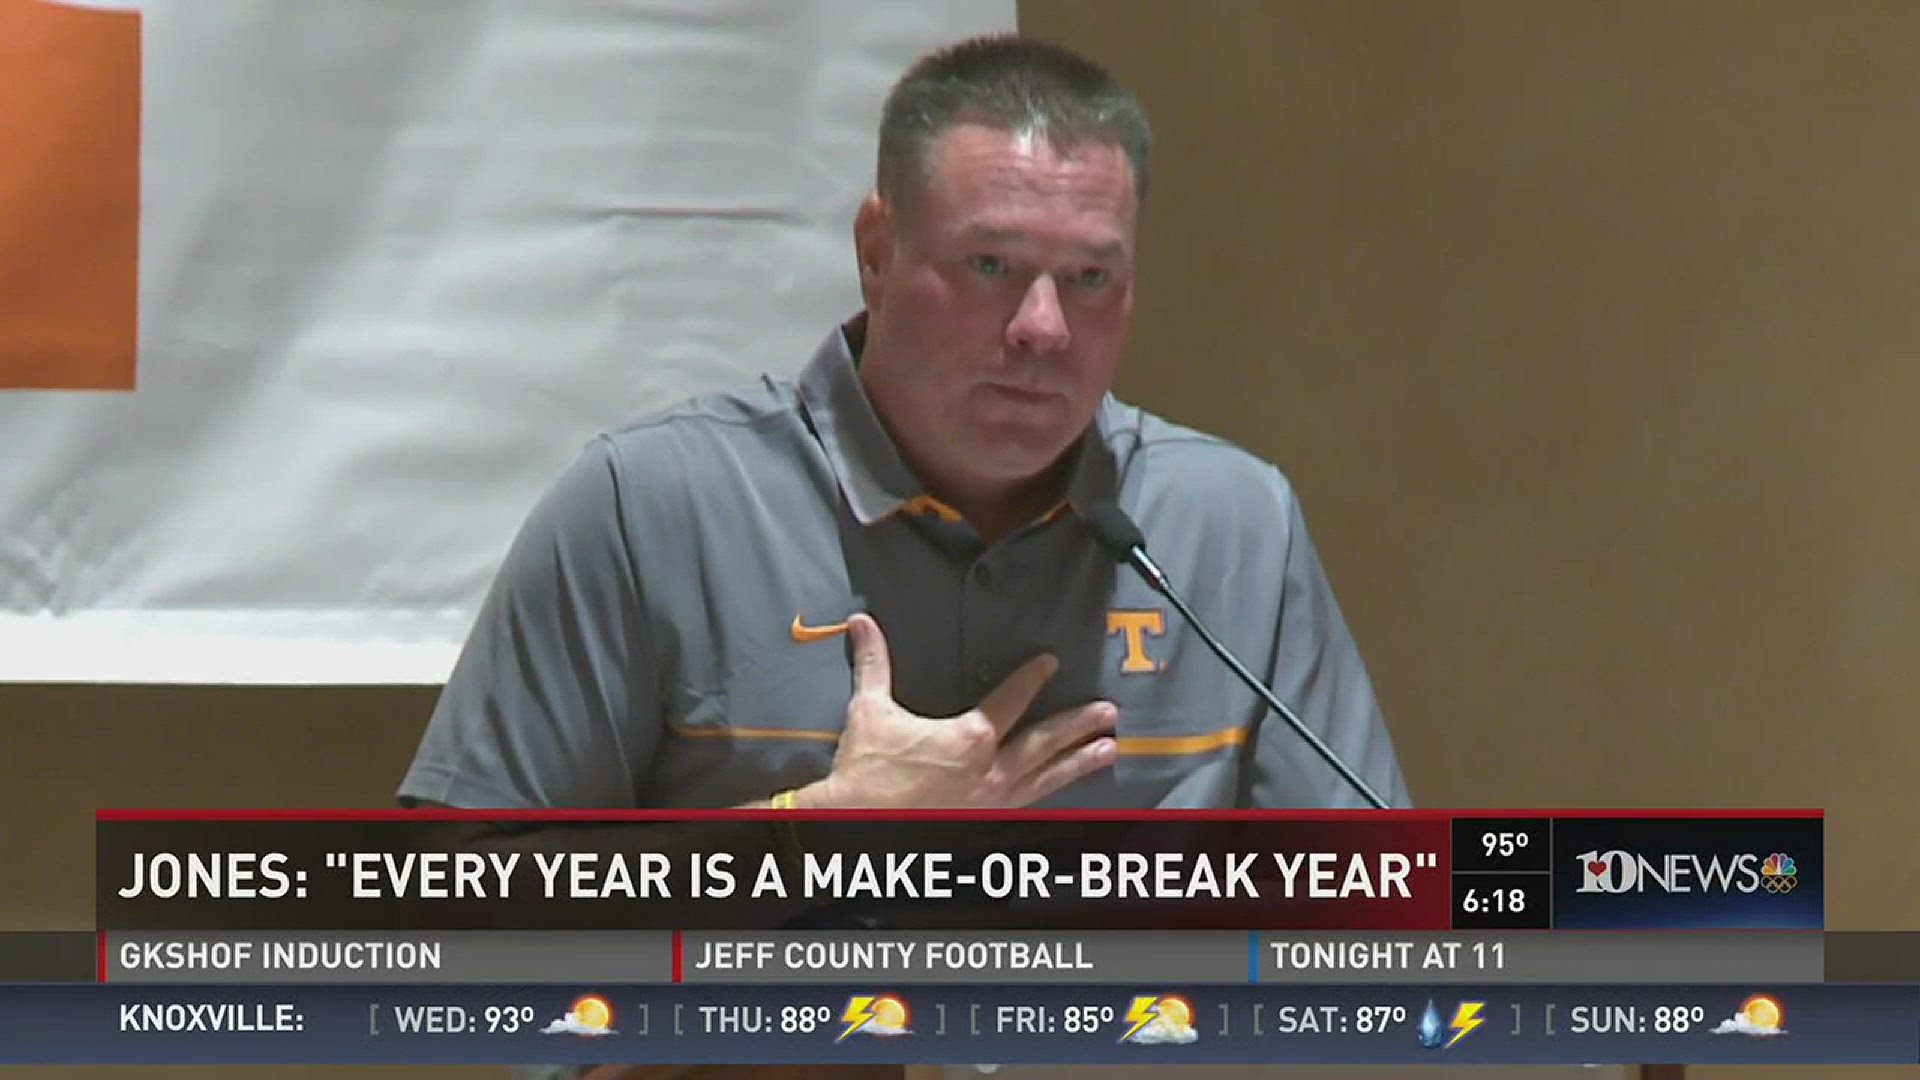 Butch Jones spoke to the Rotary Clubs of Knoxville on Tuesday.